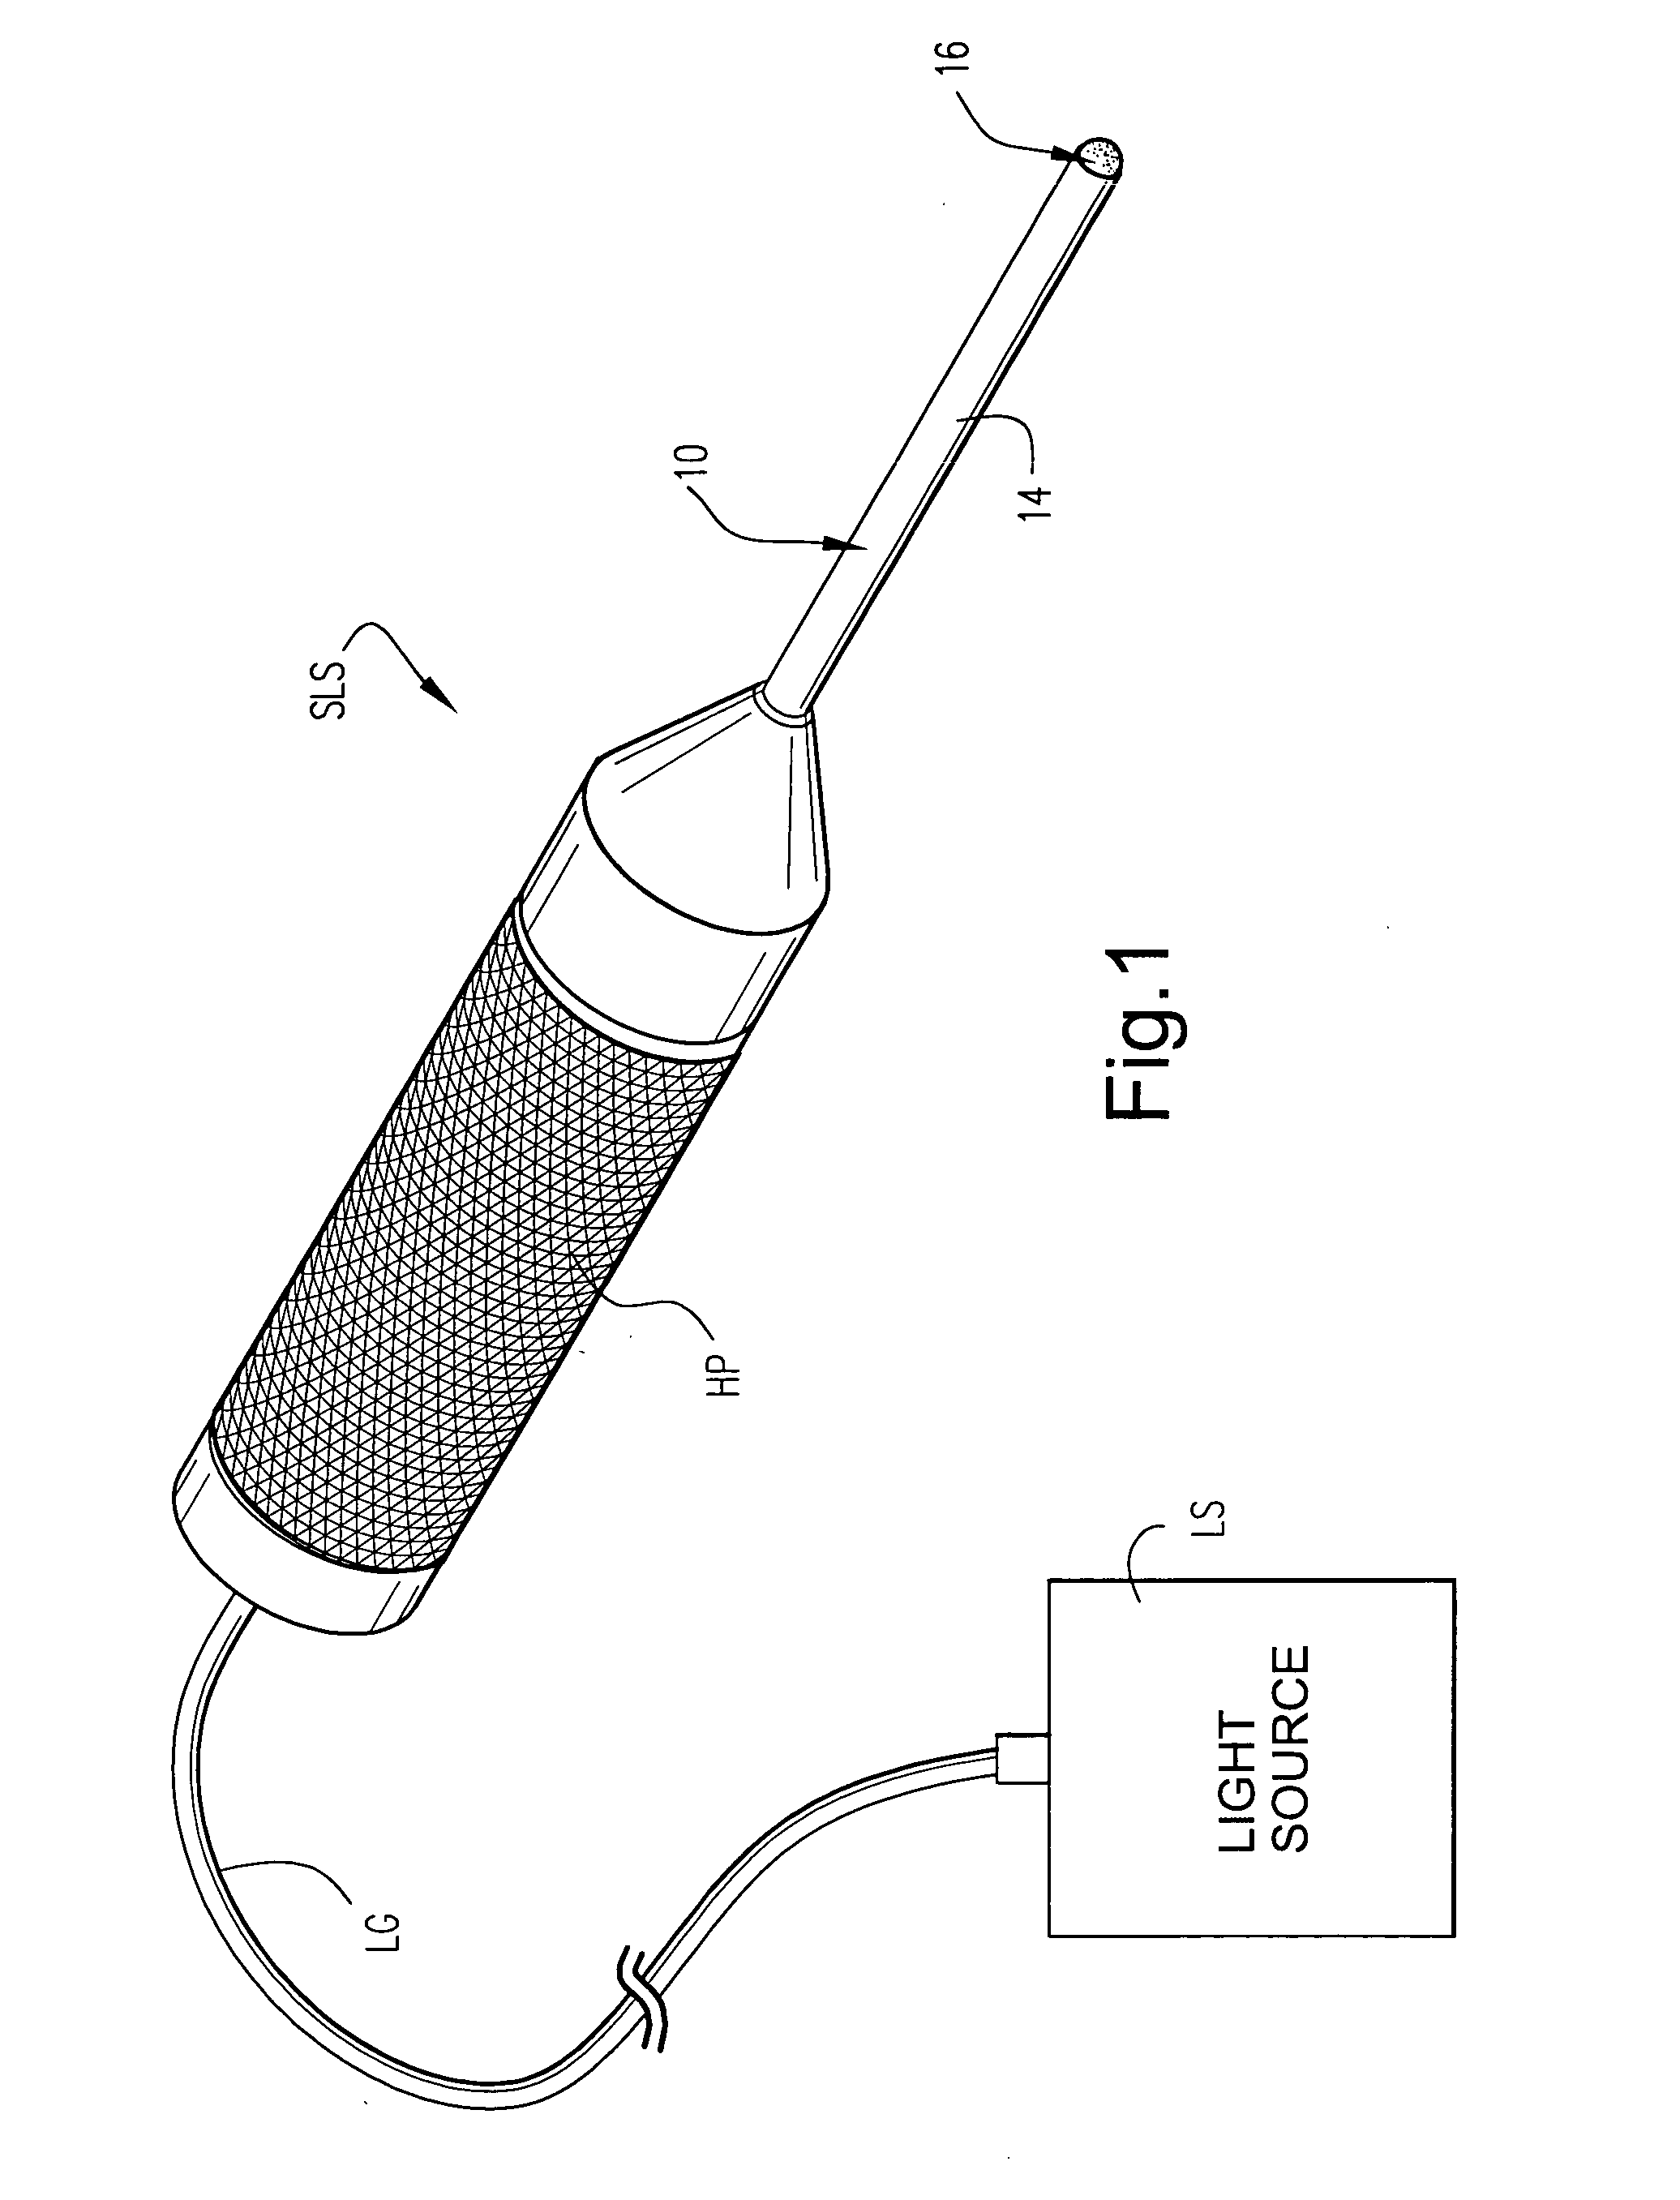 Optical fiber illuminators having integral distal light diffusers especially useful for ophthalmic surgical procedures, and methods of making the same